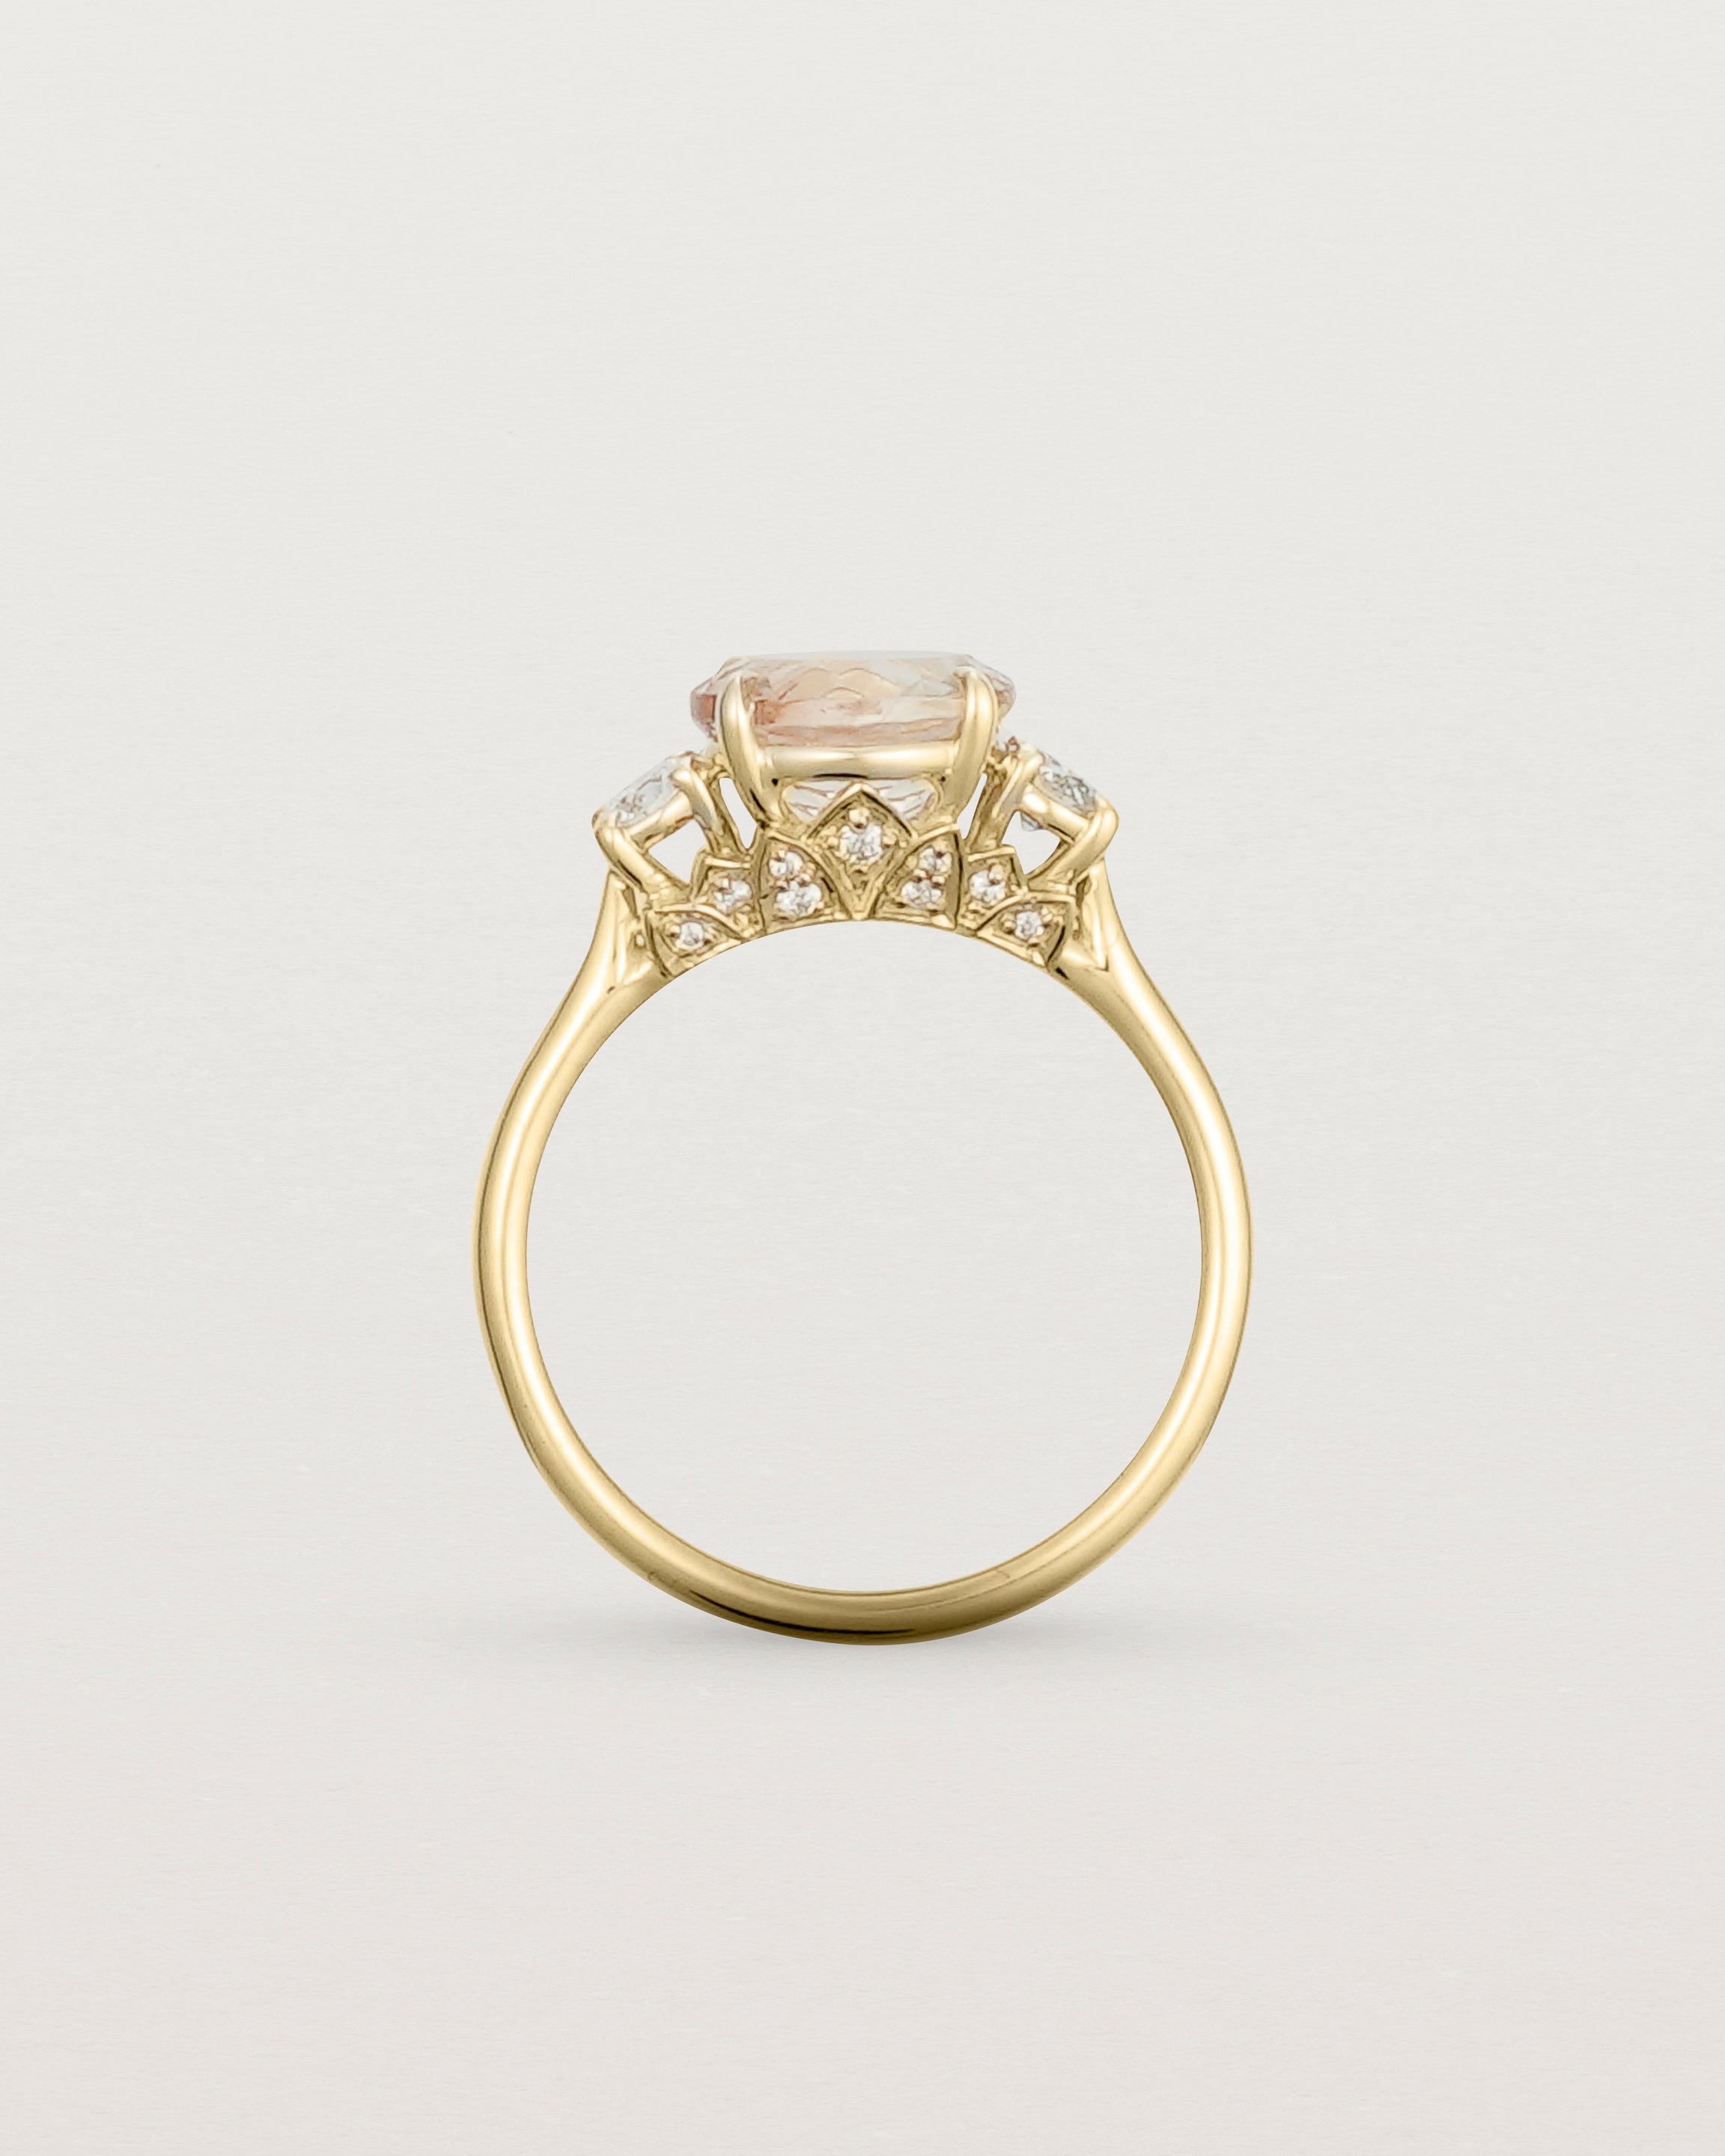 Standing view of the Laurel Round Trio Ring | Savannah Sunstone | Yellow Gold.